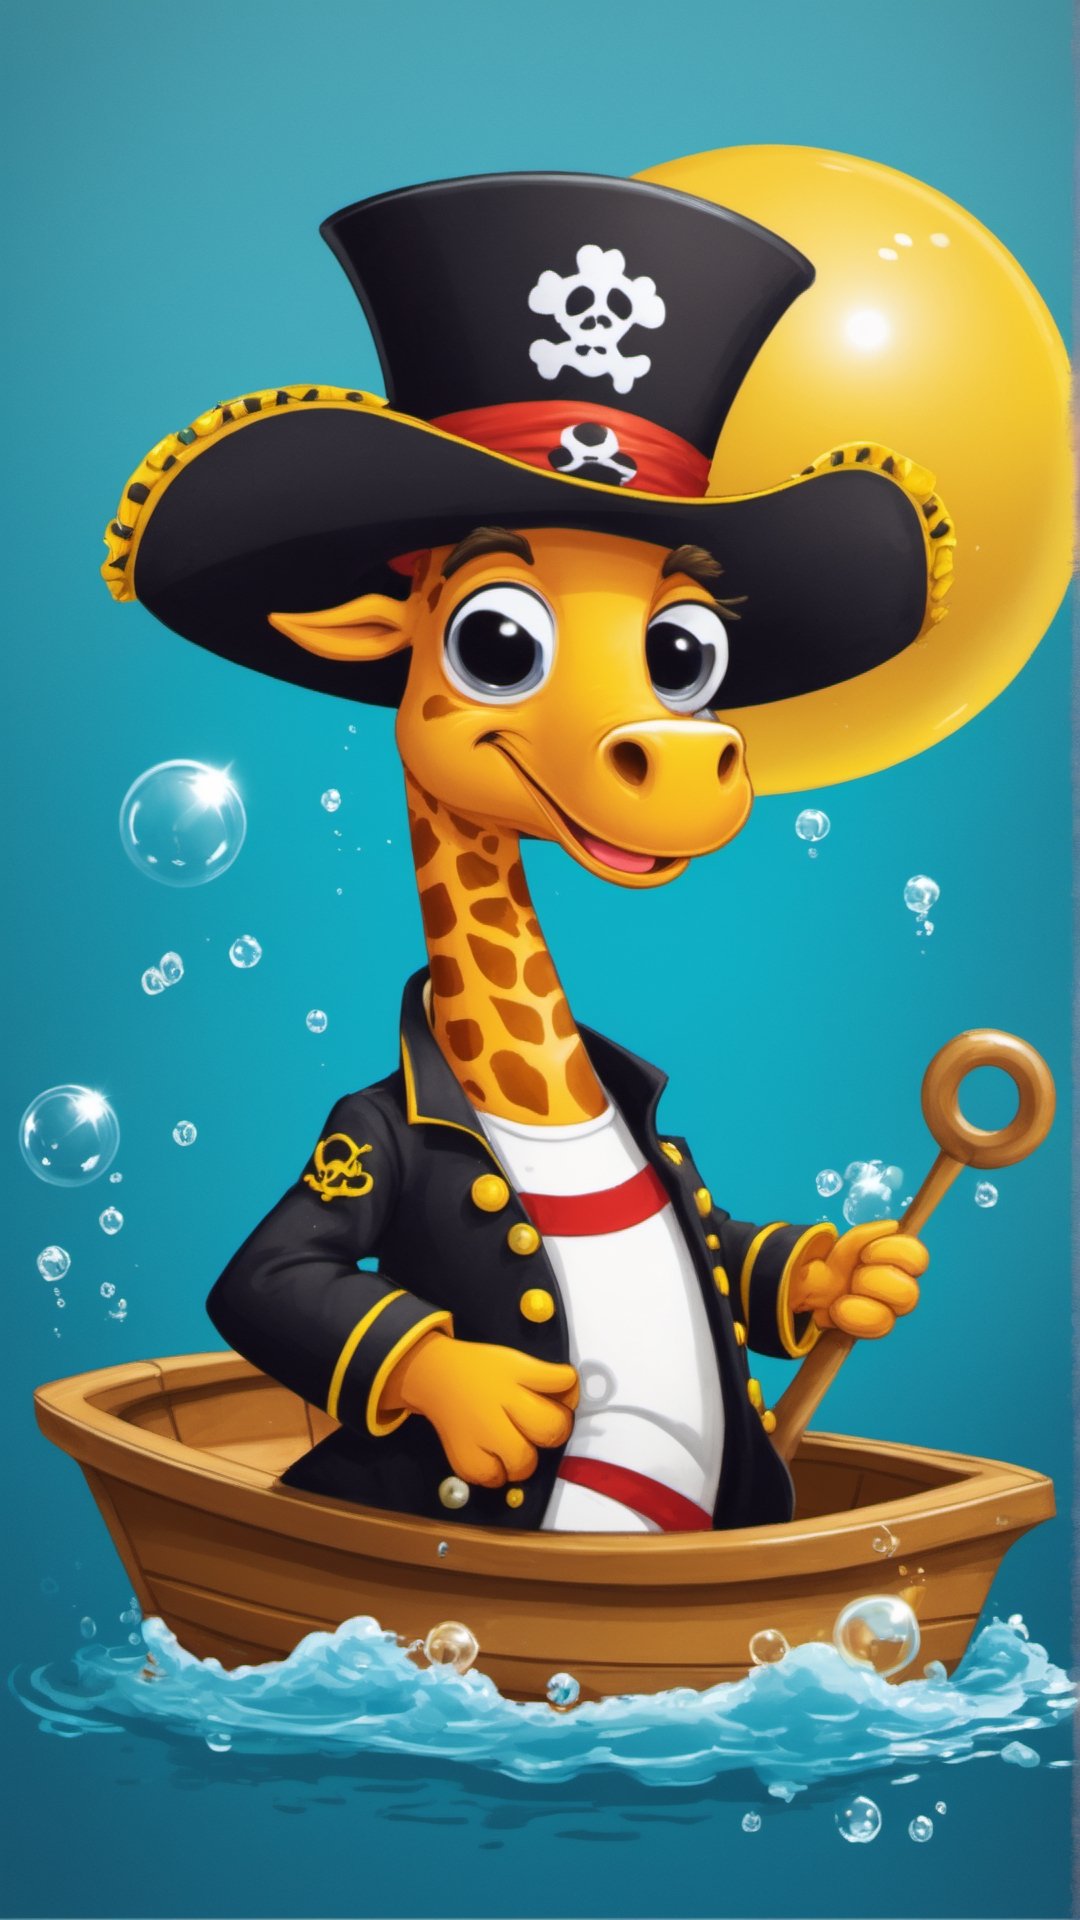 vector anime illustrated Goofy Giraffe Pirate on a Toy Boat: a giraffe character, humorously imagined as a pirate captain, on a tiny toy boat in an oversized bathtub. The giraffe, with a pirate hat, Its aura is a silly mix of bubbles and rubber ducks.